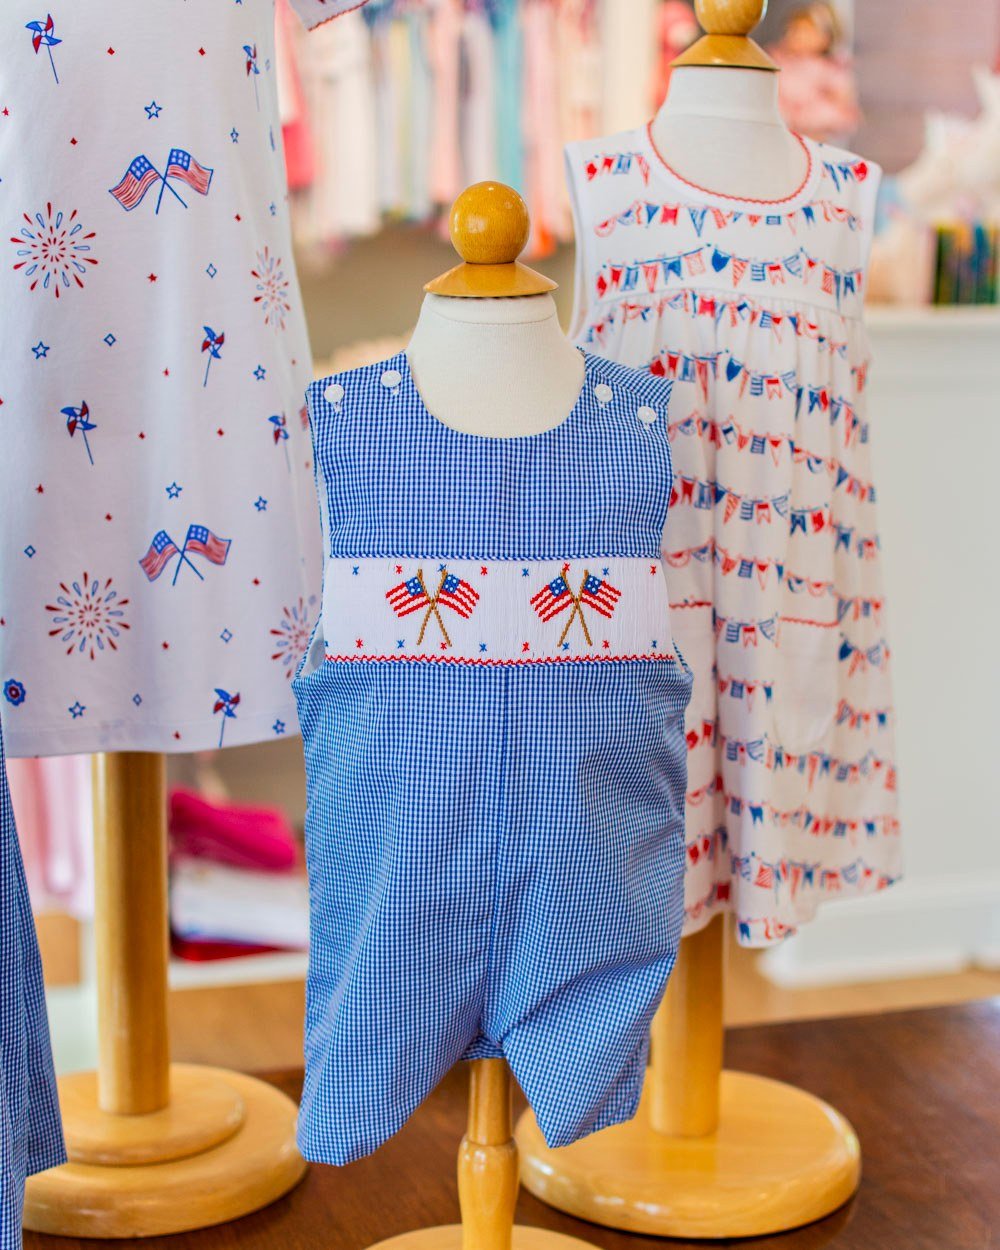 🇺🇸 Ready and waiting for Memorial Day! This blue gingham dress has a brother sister match. The bunting dress also has a boy match in shorts. 🇺🇸